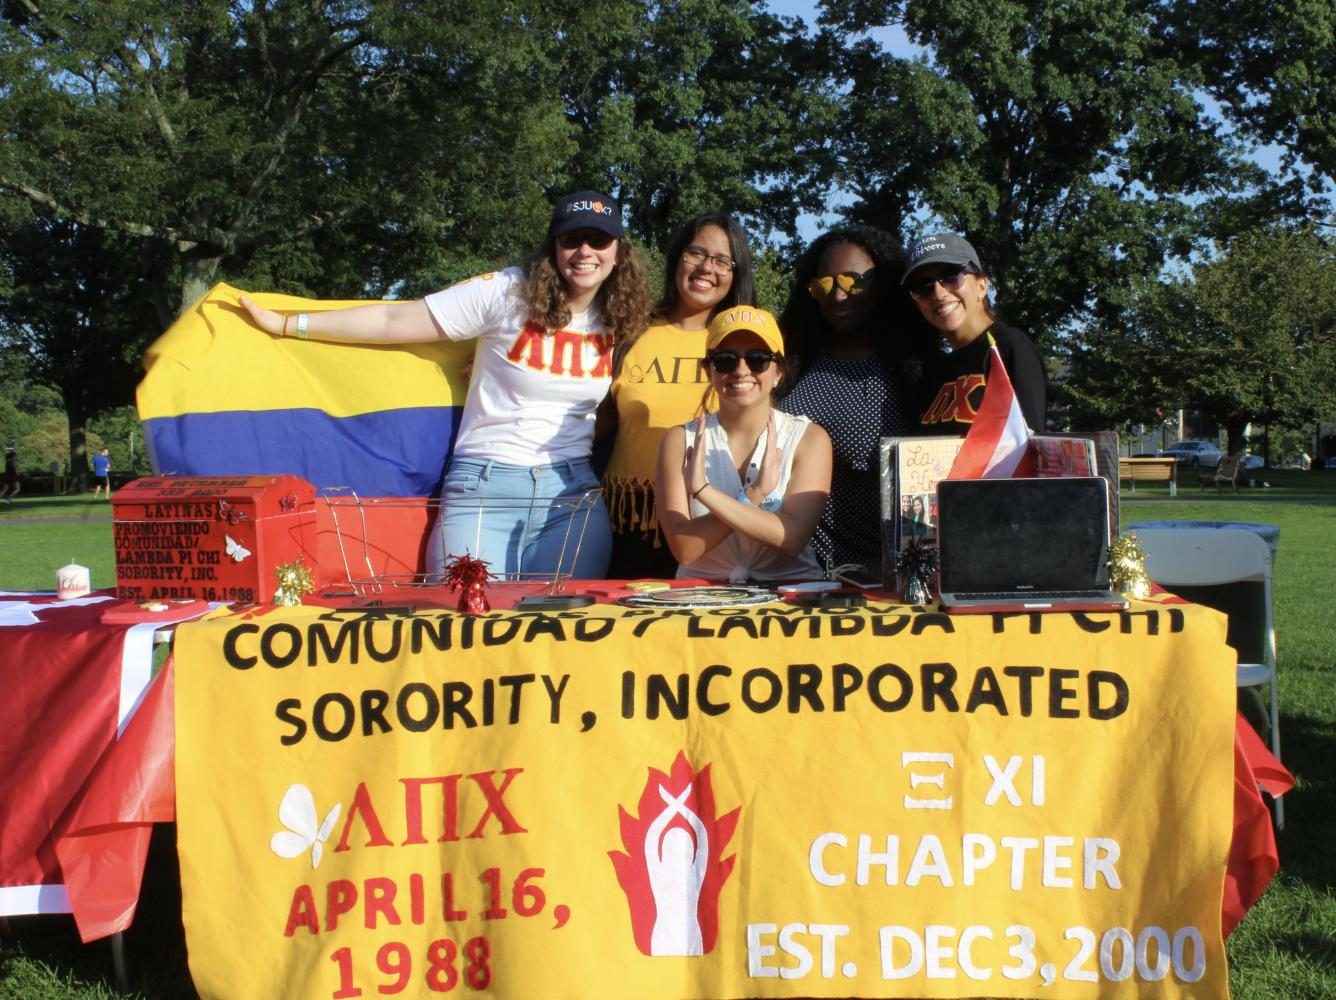 Lambda Pi Chi Sorority, Inc. was one of the groups in attendance at the mixer.